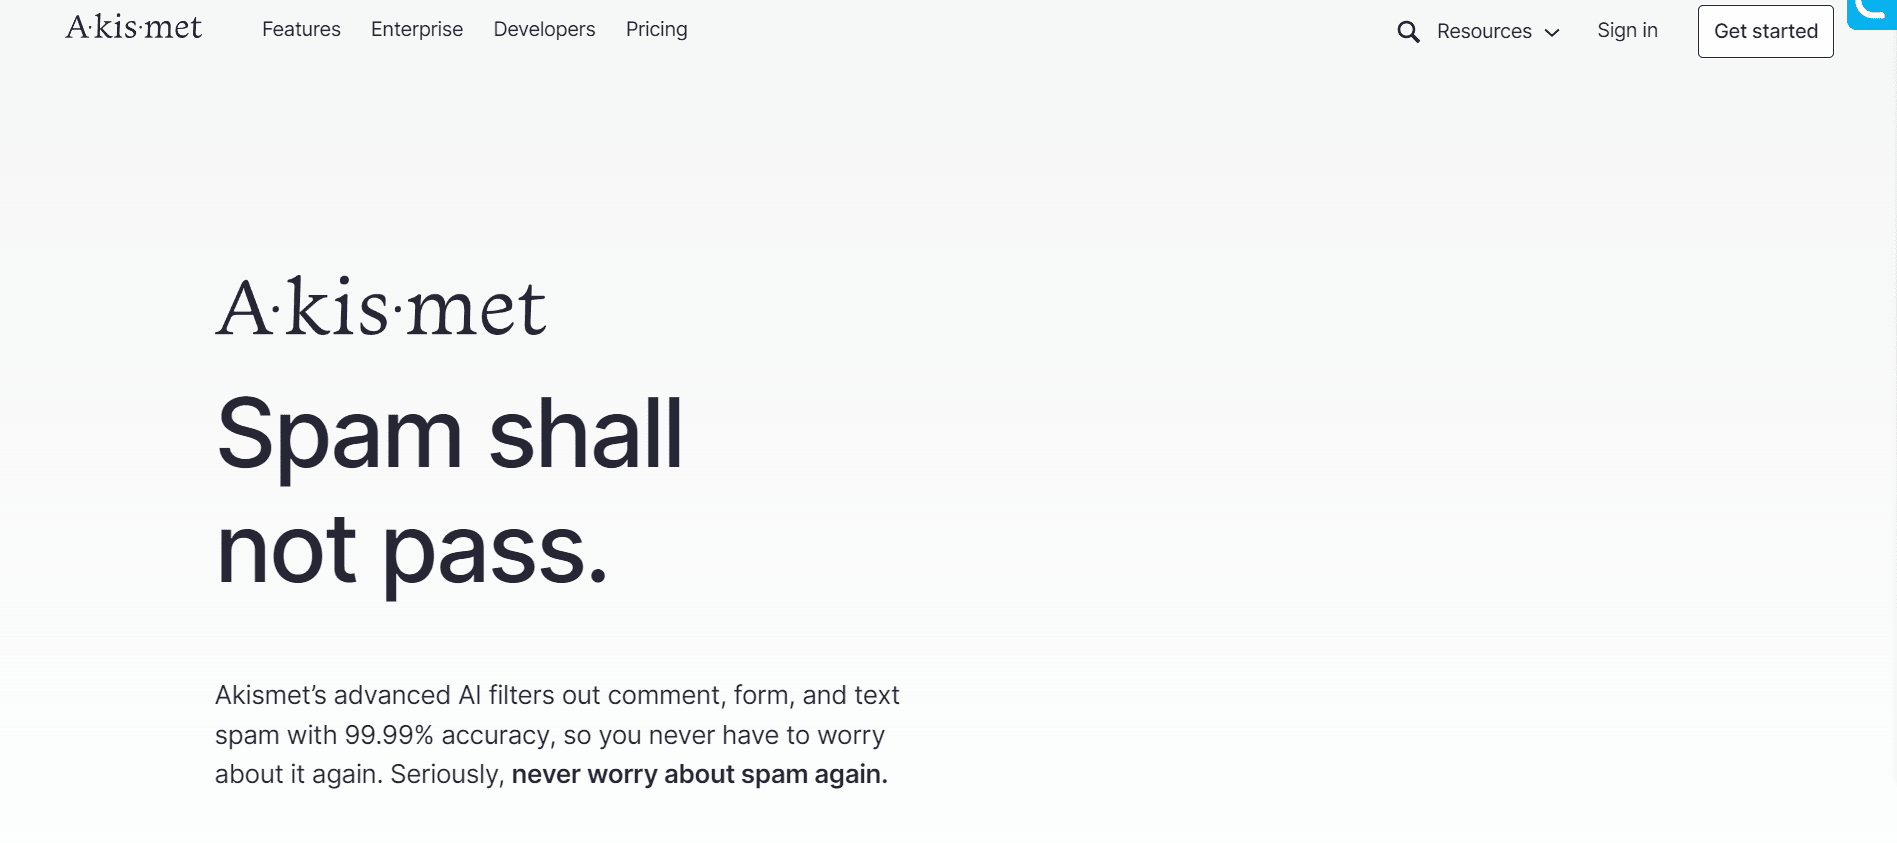 Akismet homepage with a clear message 'Spam shall not pass,' indicating their advanced AI filters to combat spam on comments, forms, and texts.